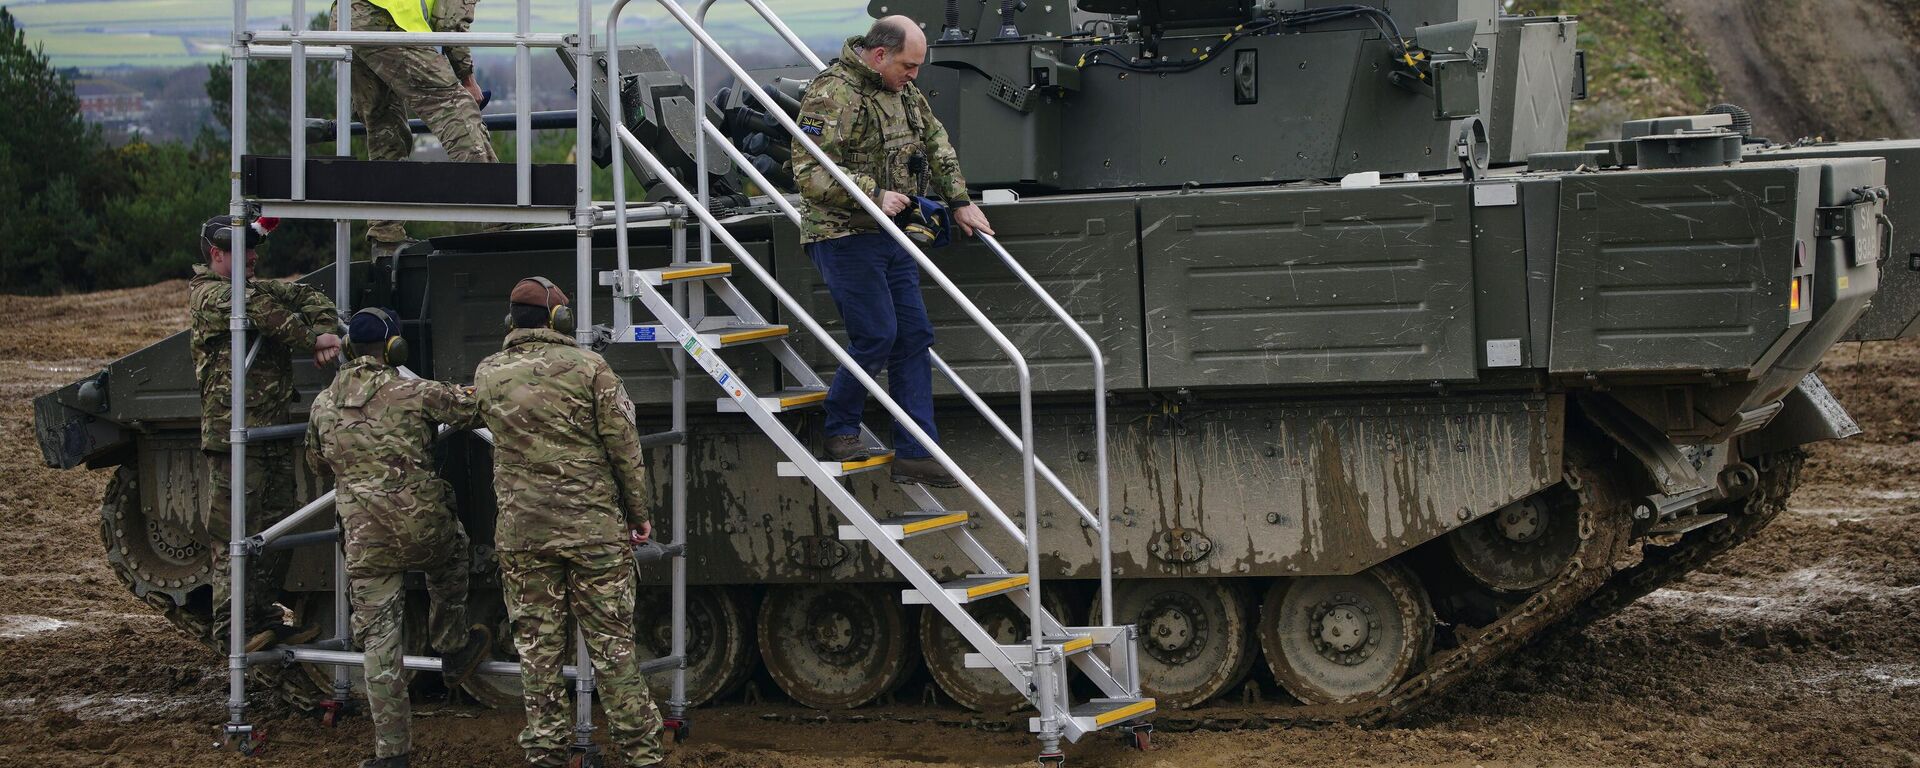 Britain's Defence Secretary Ben Wallace uses steps to climb down from a tank during a visit the Bovington Camp, a British Army military base where Ukrainian soldiers are training on Challenger 2 tanks, in Dorset, England - Sputnik International, 1920, 18.07.2023